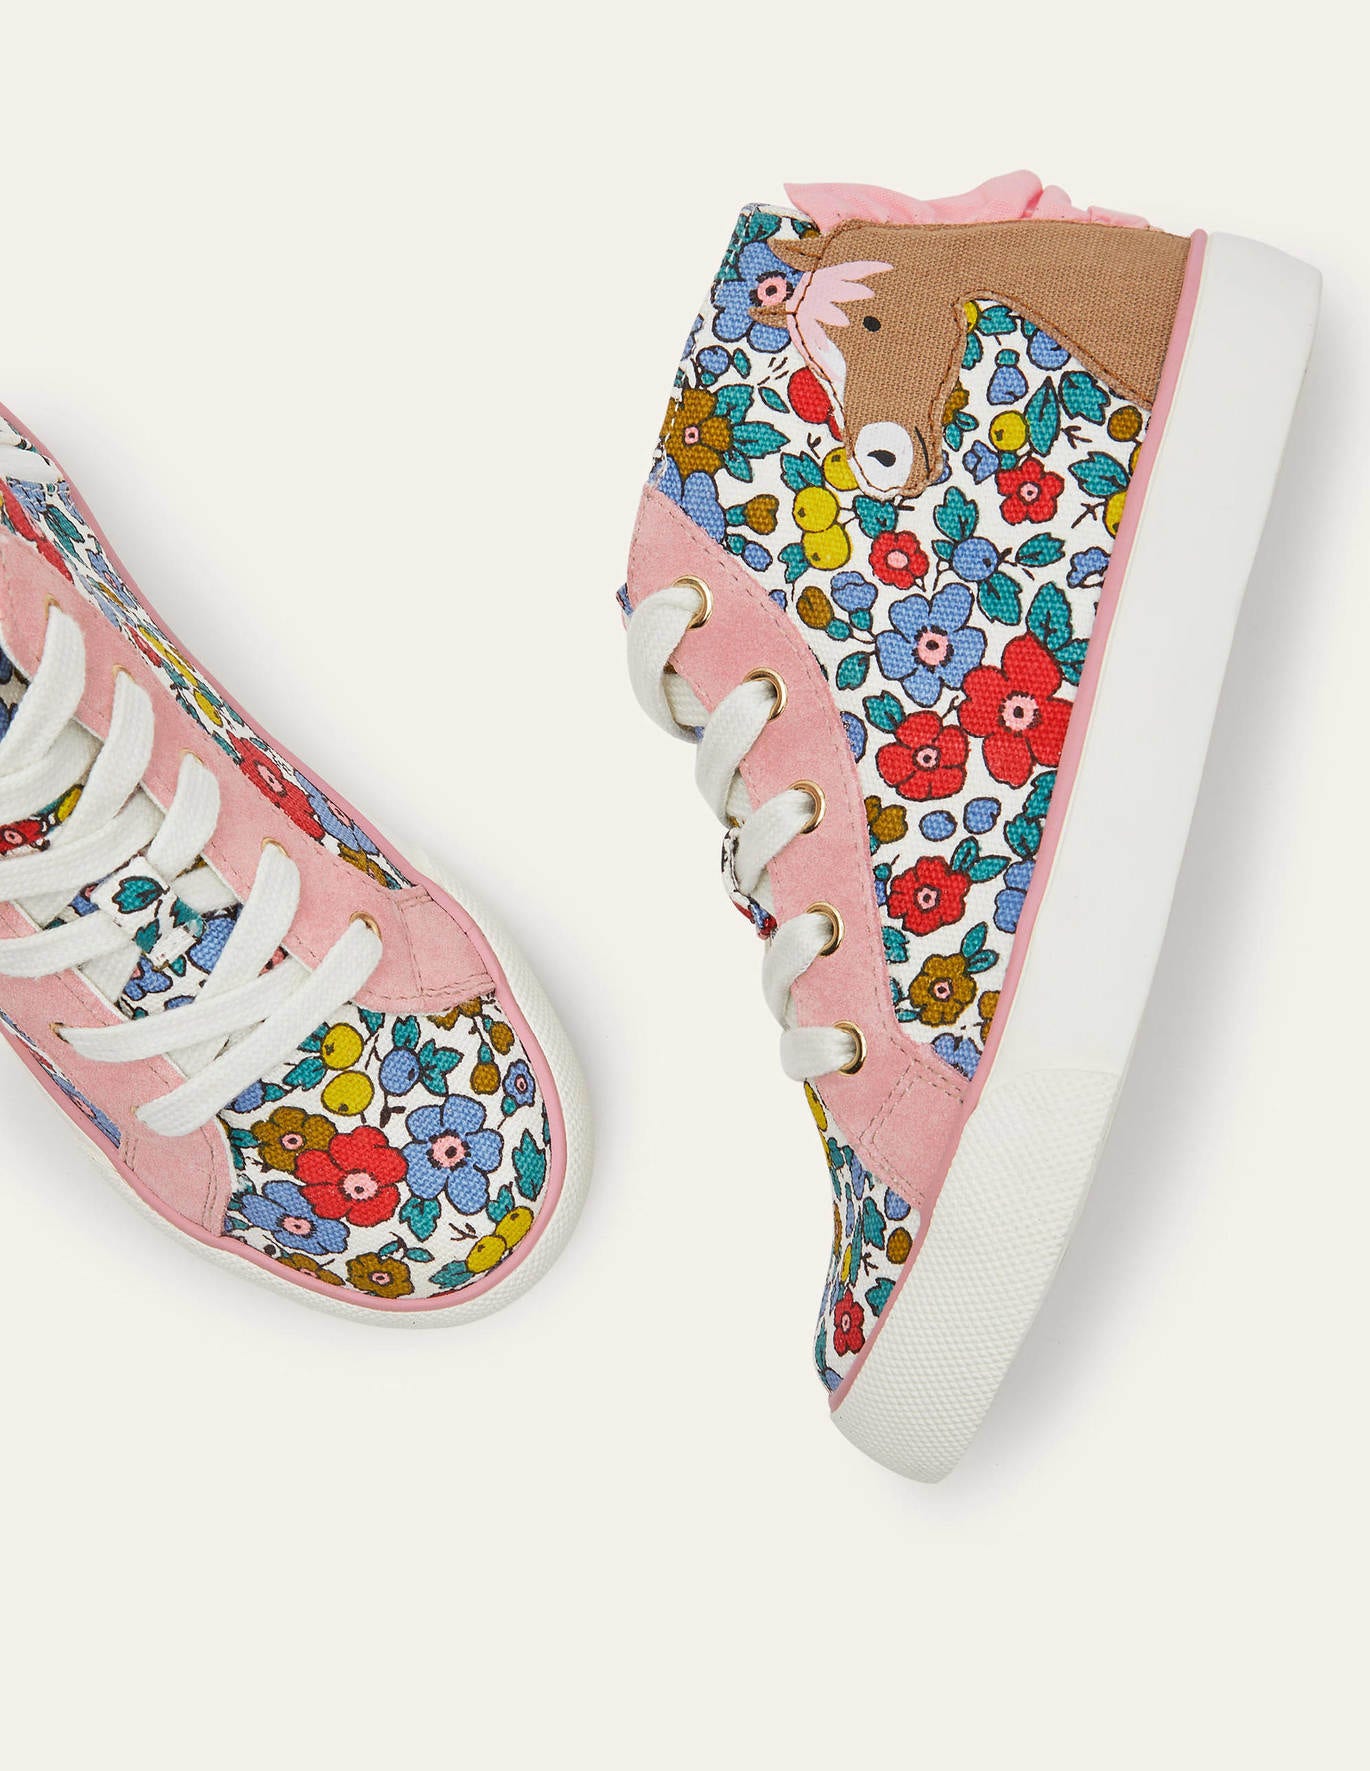 Boden Fun Novelty High Top Sneakers - Multi Floral Horse